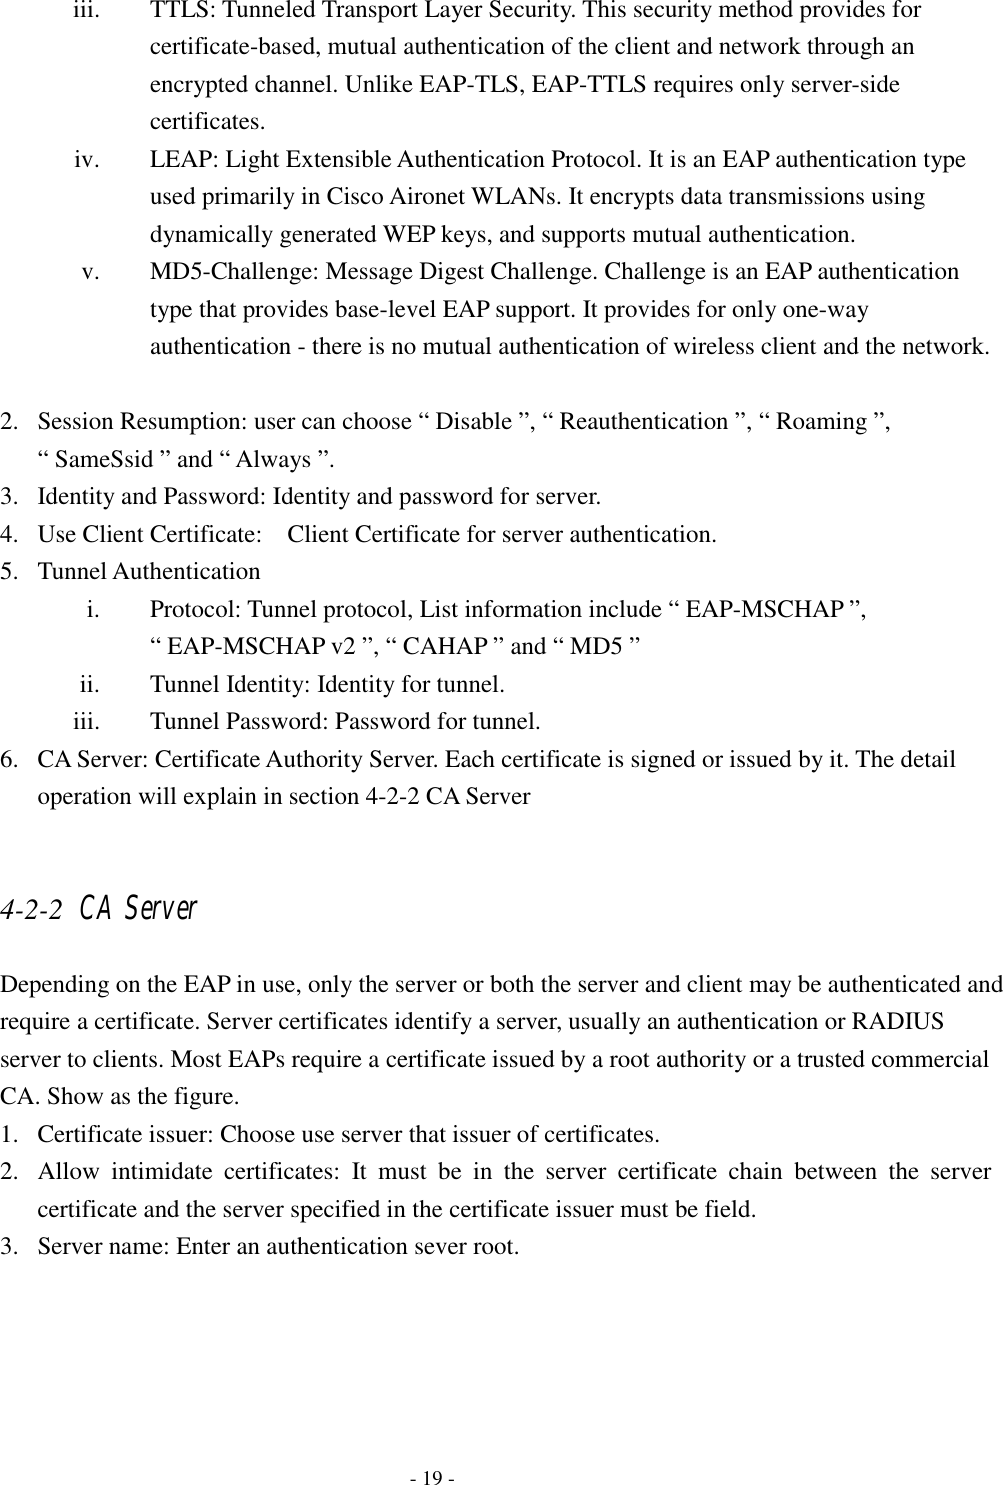    - 19 - iii. TTLS: Tunneled Transport Layer Security. This security method provides for certificate-based, mutual authentication of the client and network through an encrypted channel. Unlike EAP-TLS, EAP-TTLS requires only server-side certificates. iv. LEAP: Light Extensible Authentication Protocol. It is an EAP authentication type used primarily in Cisco Aironet WLANs. It encrypts data transmissions using dynamically generated WEP keys, and supports mutual authentication. v. MD5-Challenge: Message Digest Challenge. Challenge is an EAP authentication type that provides base-level EAP support. It provides for only one-way authentication - there is no mutual authentication of wireless client and the network.  2. Session Resumption: user can choose “ Disable ”, “ Reauthentication ”, “ Roaming ”, “ SameSsid ” and “ Always ”. 3. Identity and Password: Identity and password for server. 4. Use Client Certificate:    Client Certificate for server authentication. 5. Tunnel Authentication i. Protocol: Tunnel protocol, List information include “ EAP-MSCHAP ”, “ EAP-MSCHAP v2 ”, “ CAHAP ” and “ MD5 ” ii. Tunnel Identity: Identity for tunnel. iii. Tunnel Password: Password for tunnel. 6. CA Server: Certificate Authority Server. Each certificate is signed or issued by it. The detail operation will explain in section 4-2-2 CA Server  4-2-2 CA Server Depending on the EAP in use, only the server or both the server and client may be authenticated and require a certificate. Server certificates identify a server, usually an authentication or RADIUS server to clients. Most EAPs require a certificate issued by a root authority or a trusted commercial CA. Show as the figure. 1. Certificate issuer: Choose use server that issuer of certificates.   2. Allow intimidate certificates: It must be in the server certificate chain between the server certificate and the server specified in the certificate issuer must be field. 3. Server name: Enter an authentication sever root. 